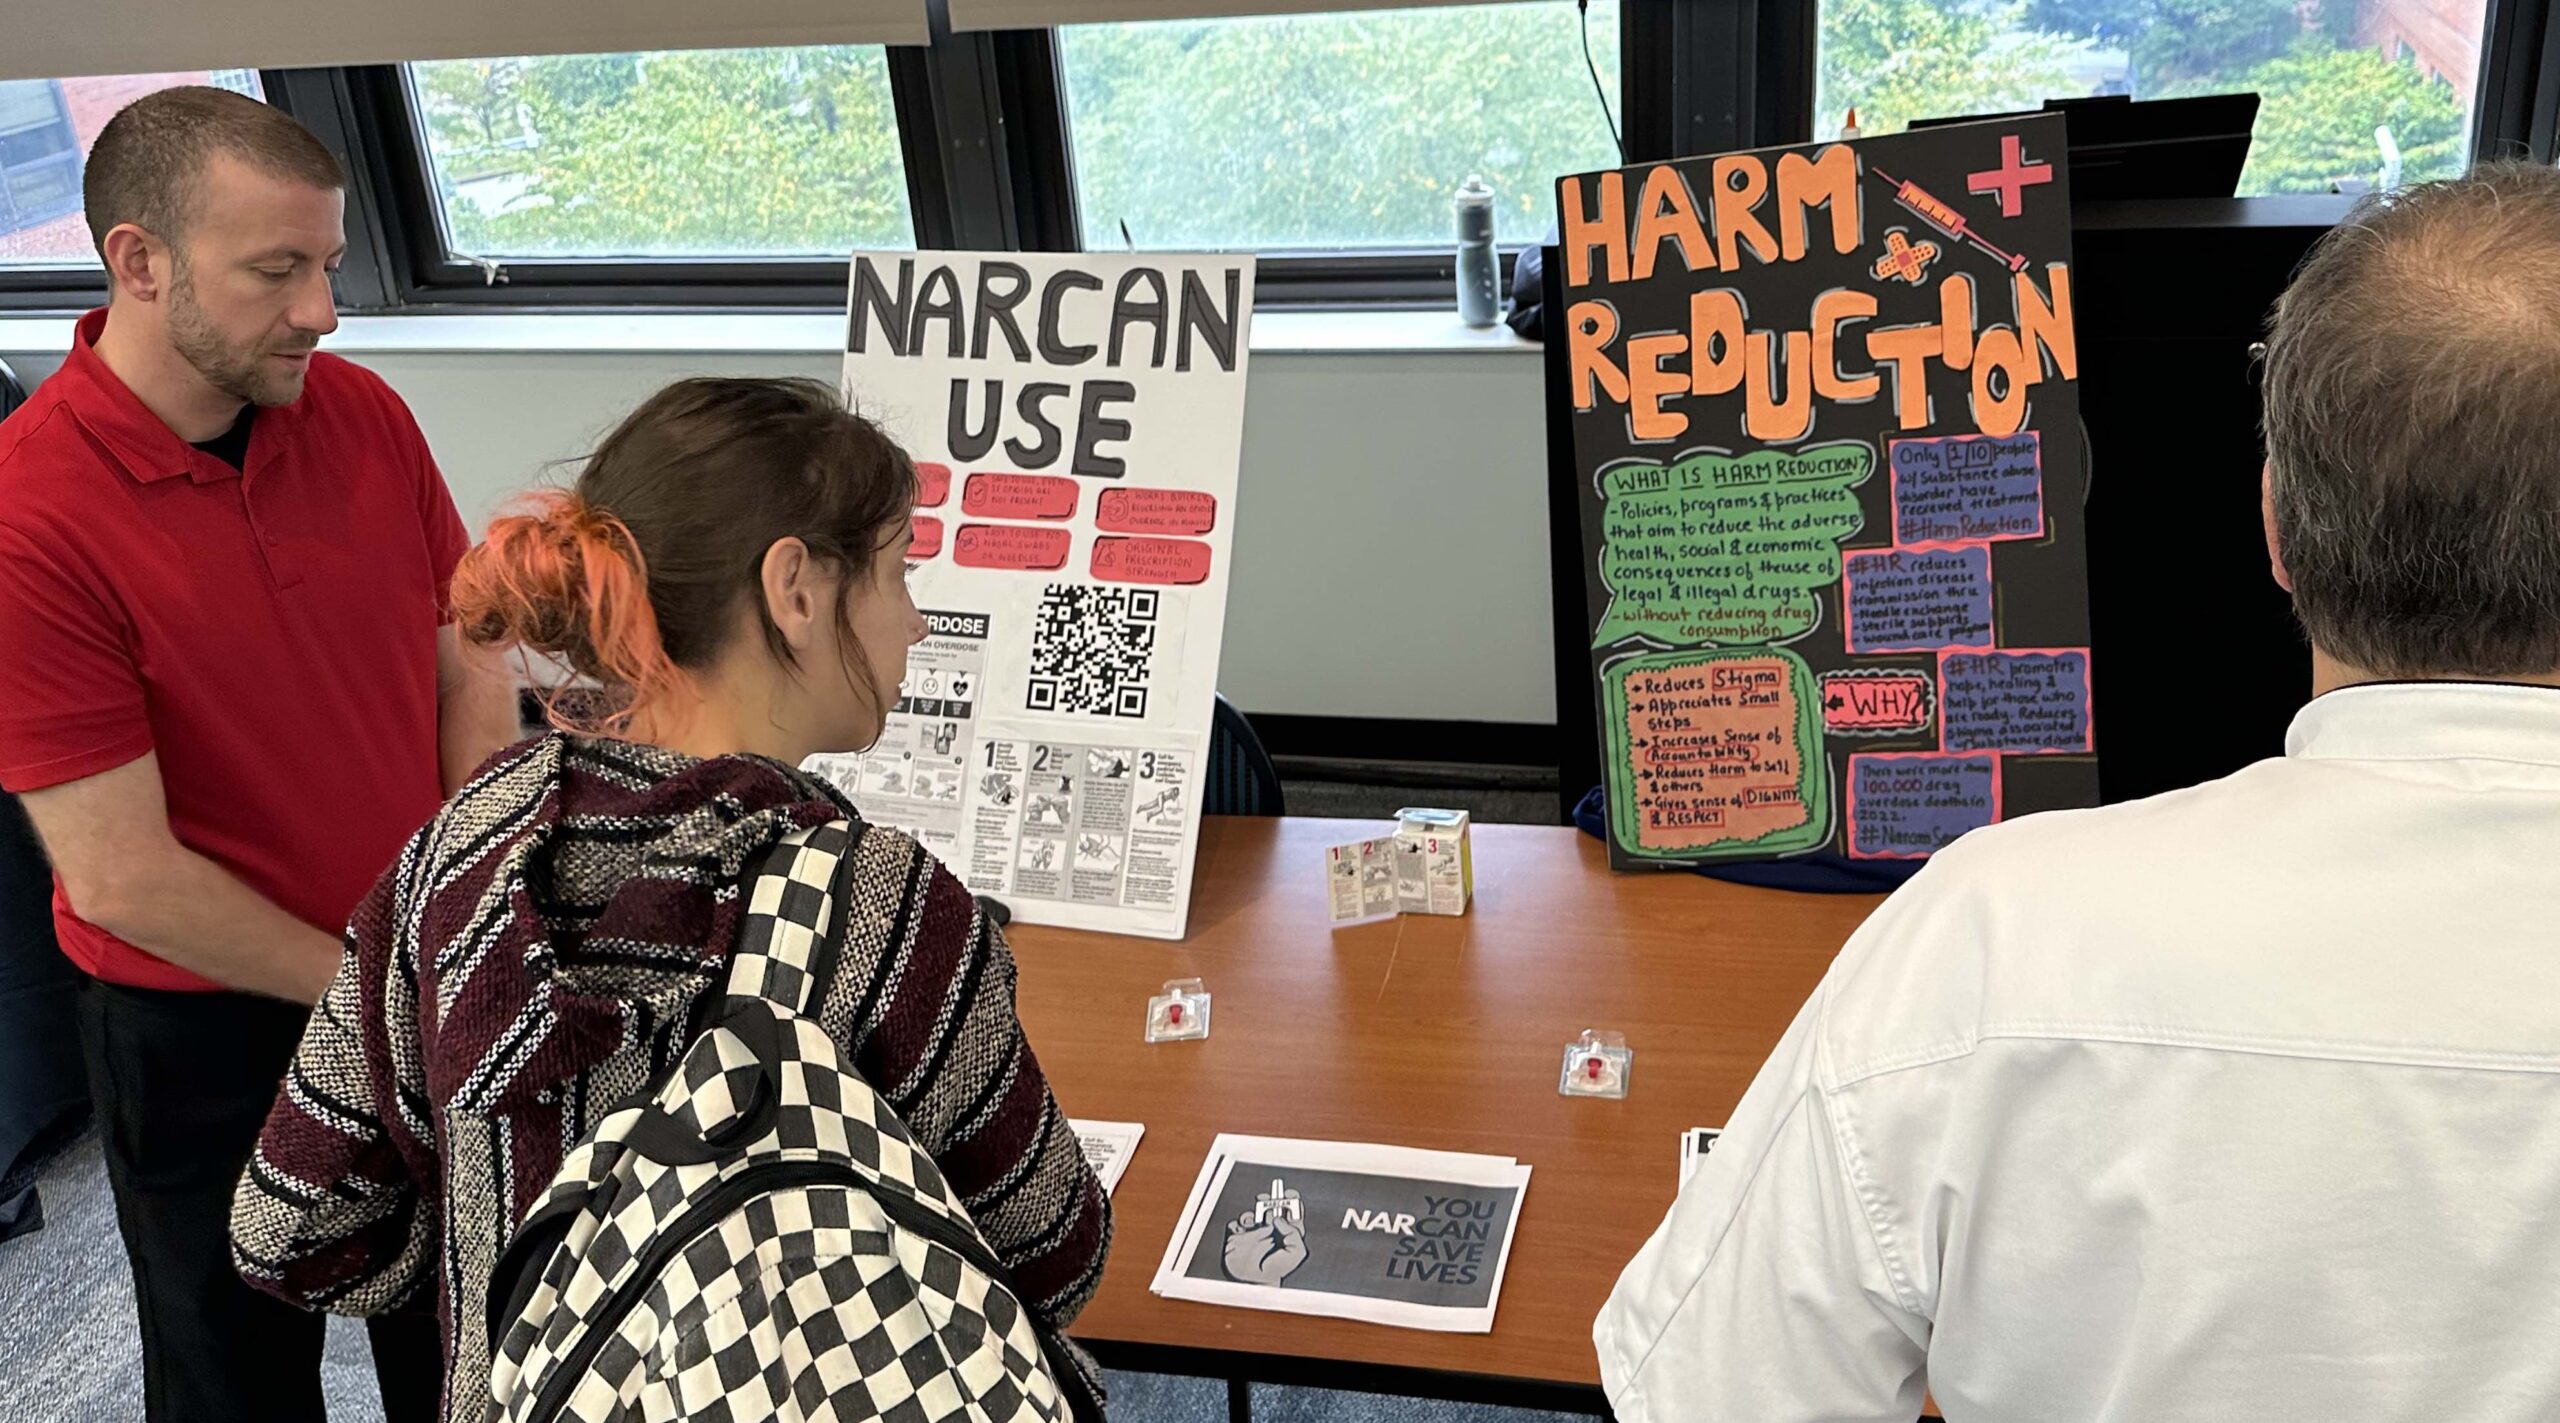 Students viewing posters about using Narcan to treat drug overdose